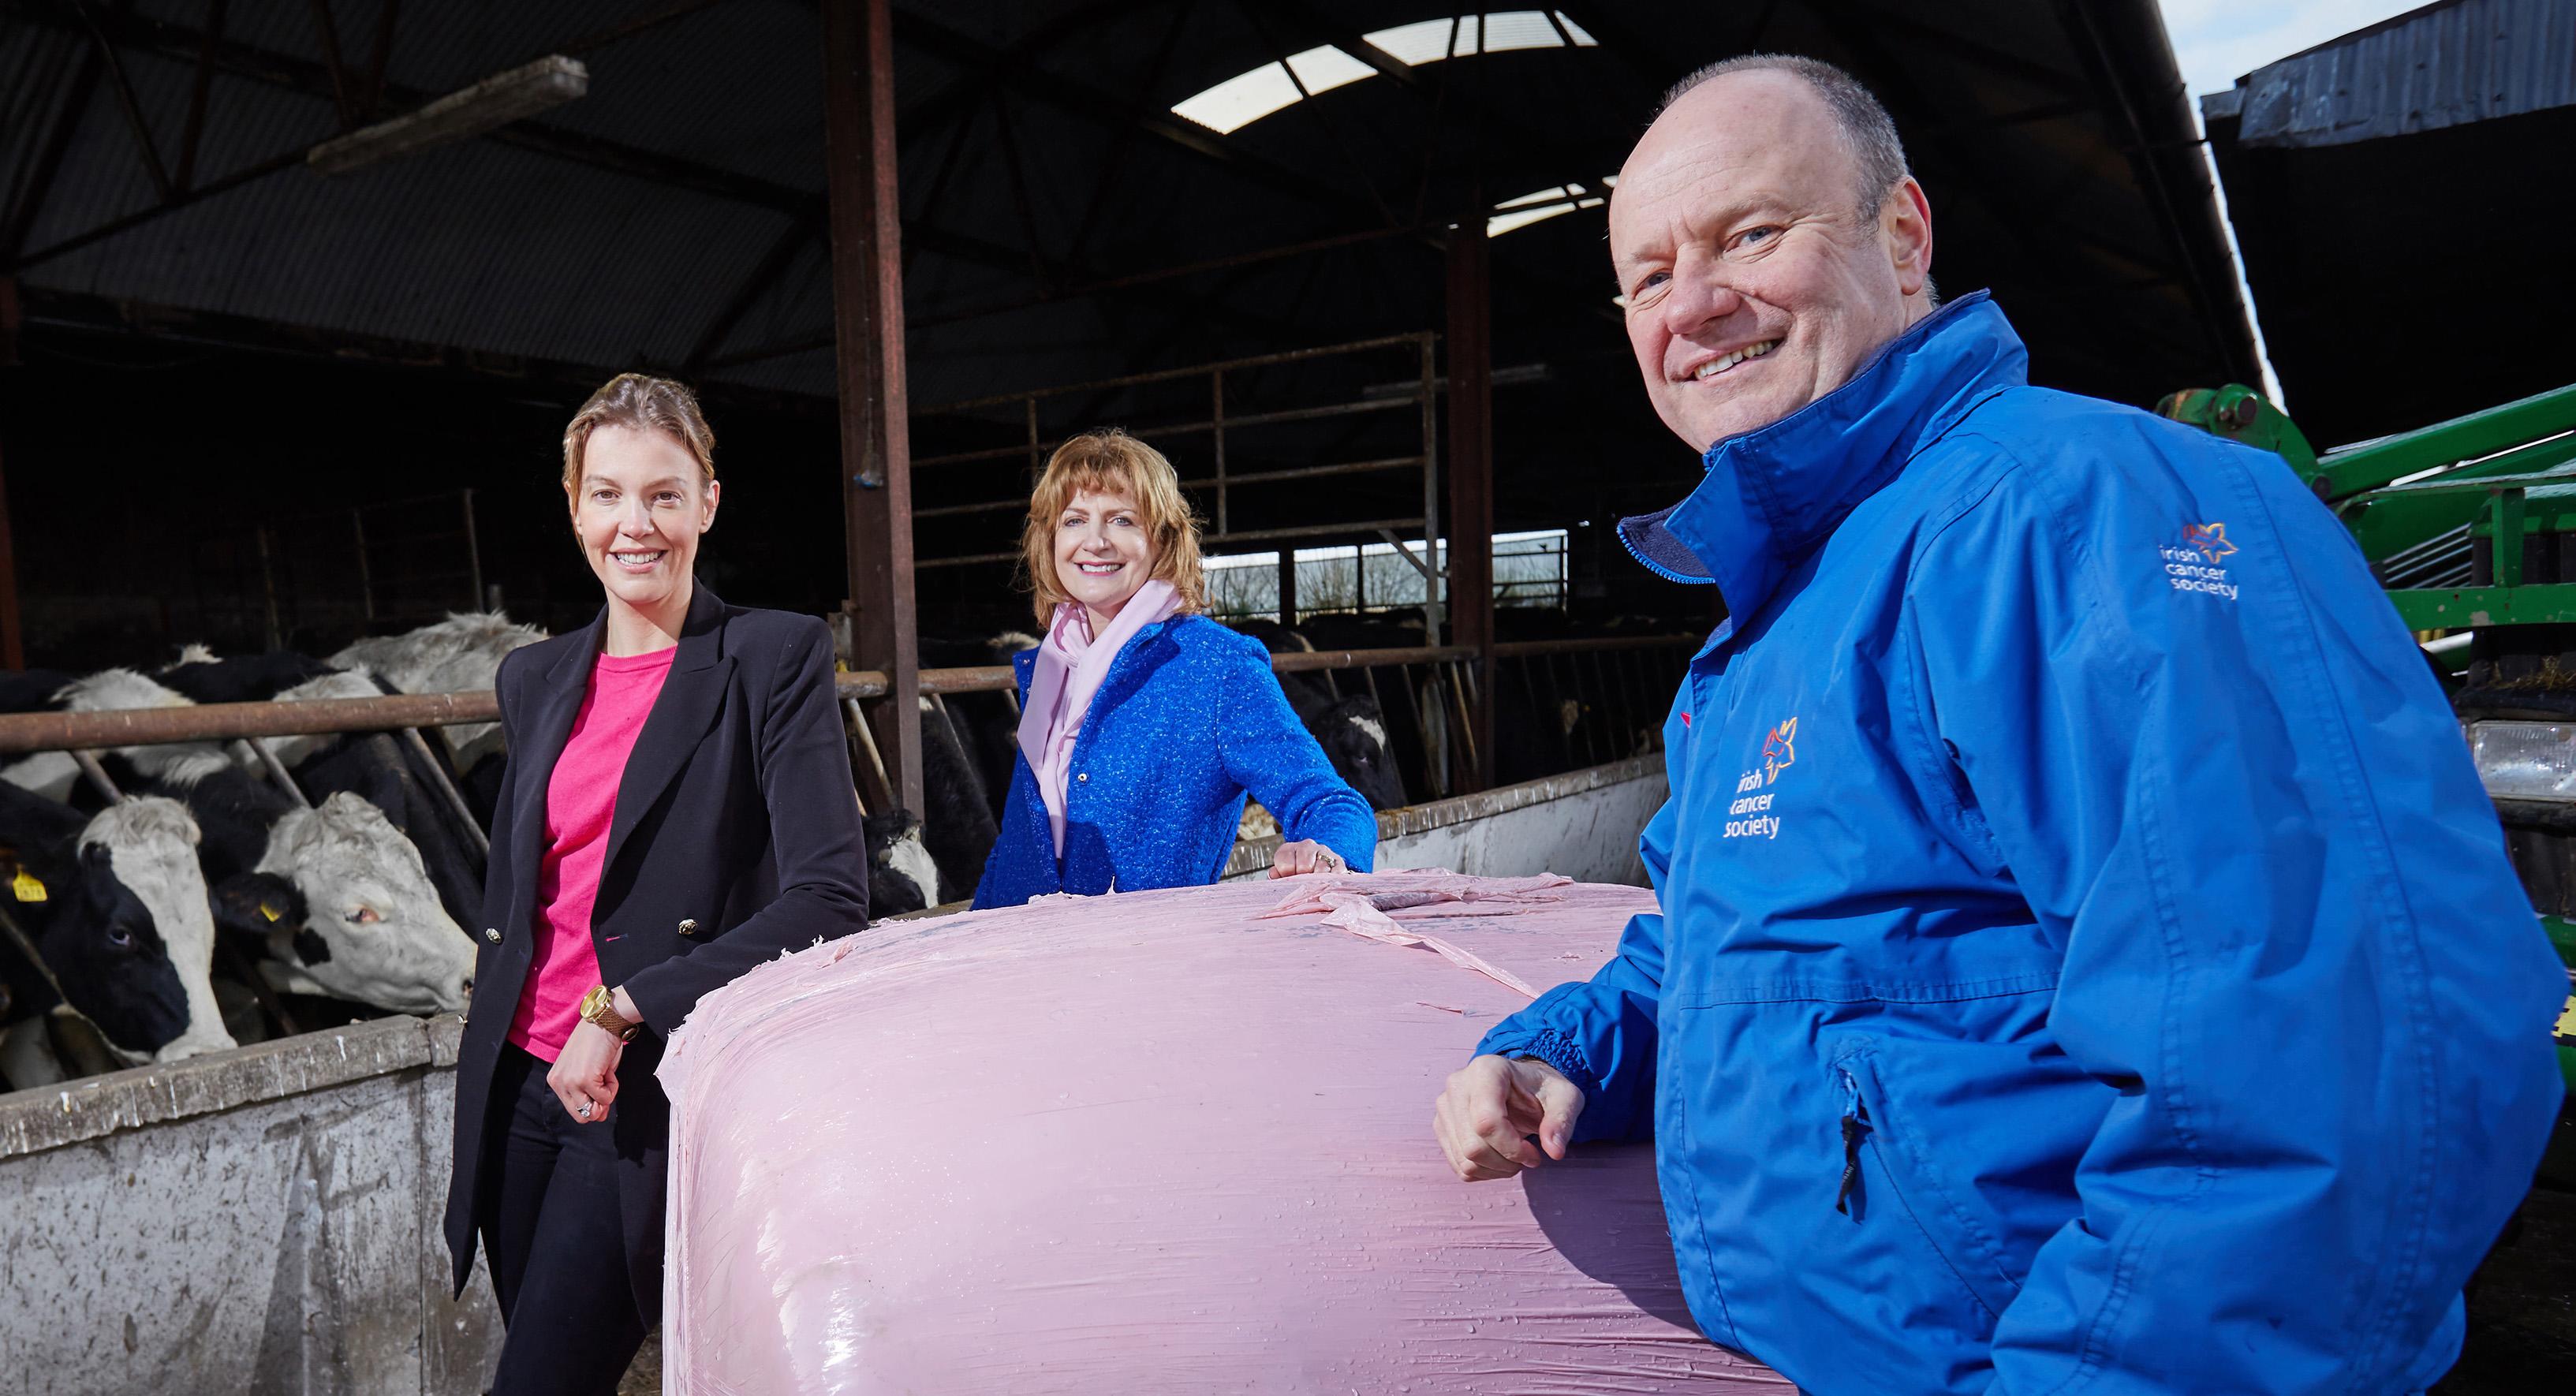 It’s a Wrap! Dairygold raises vital funds for the Irish Cancer Society